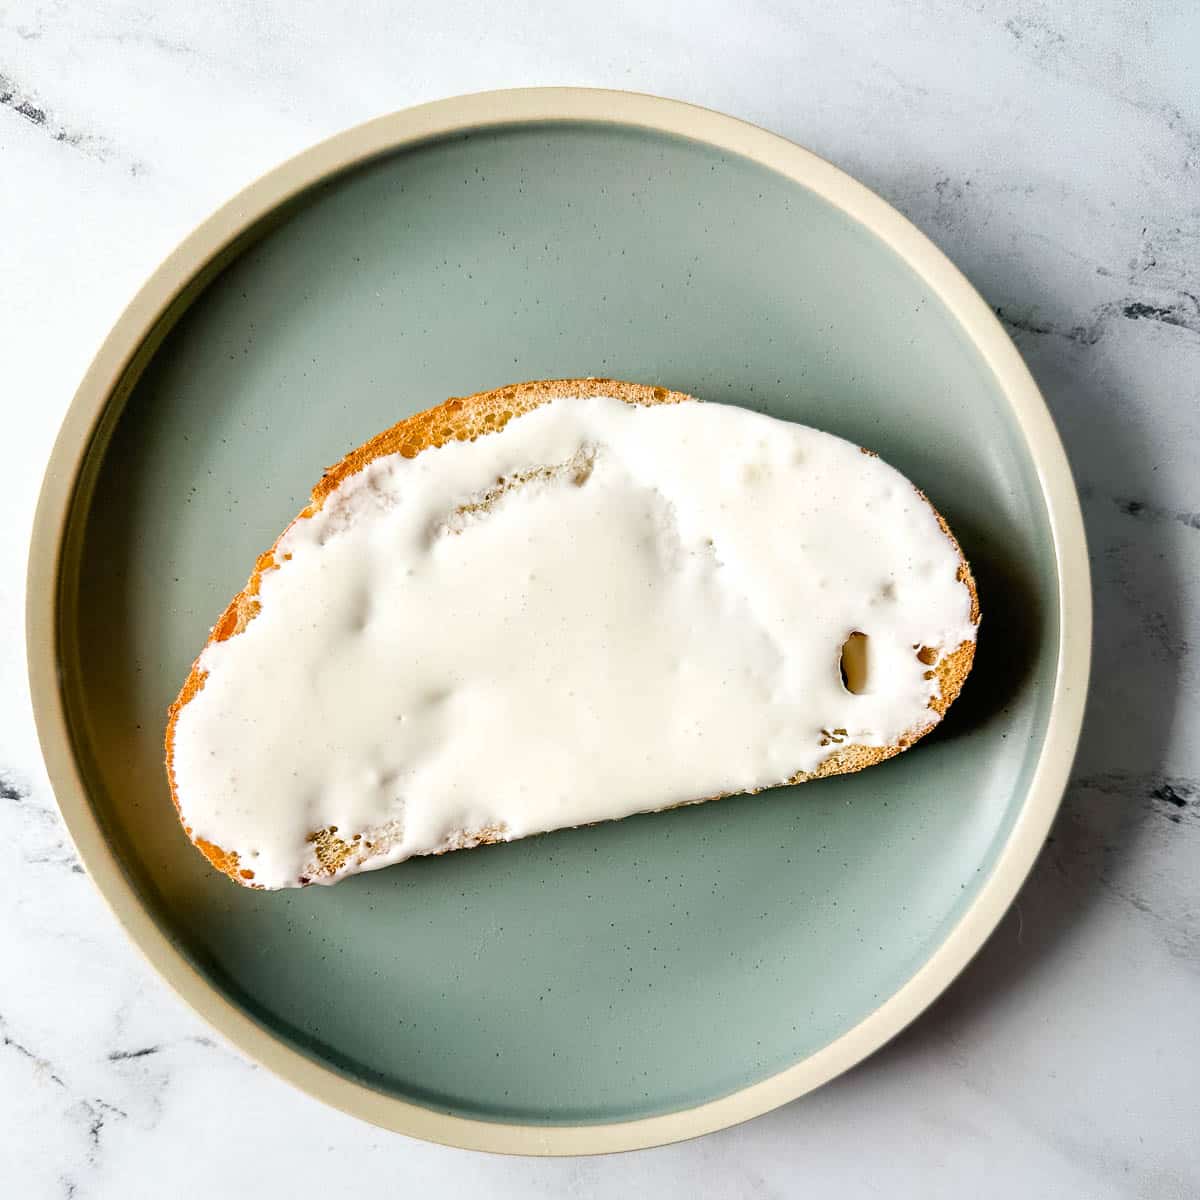 Toast spread with cream cheese on a blue plate.